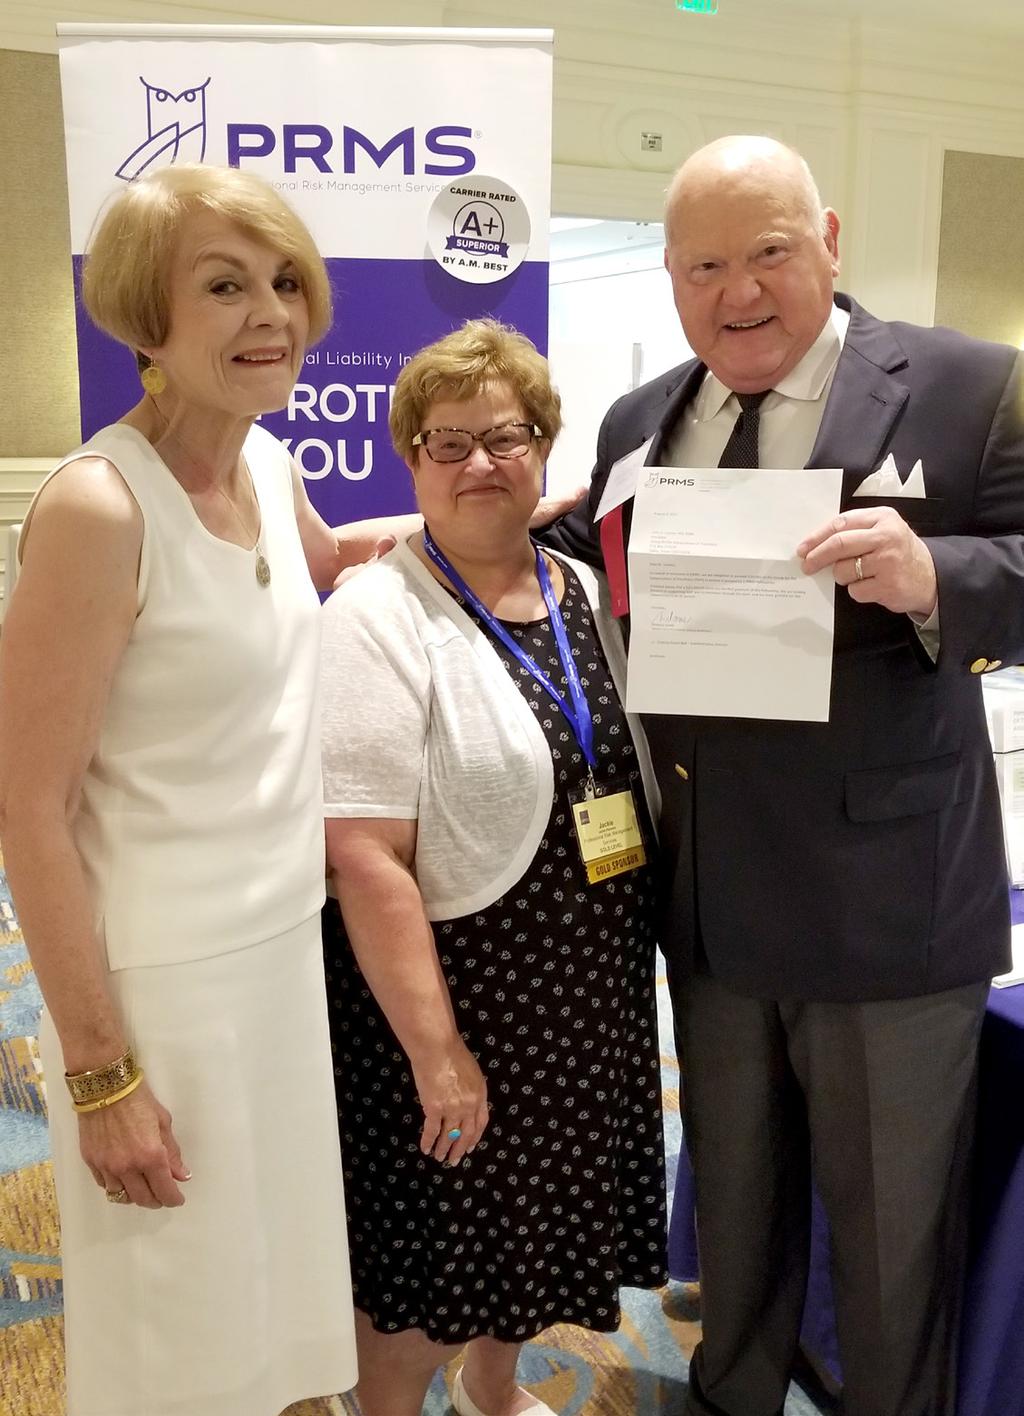 PRMS Executive Vice President JACKIE PALUMBO presents GAP President JOHN LOONEY, MD along with SUSAN LOONEY a letter of agreement for the PRMS endowment.